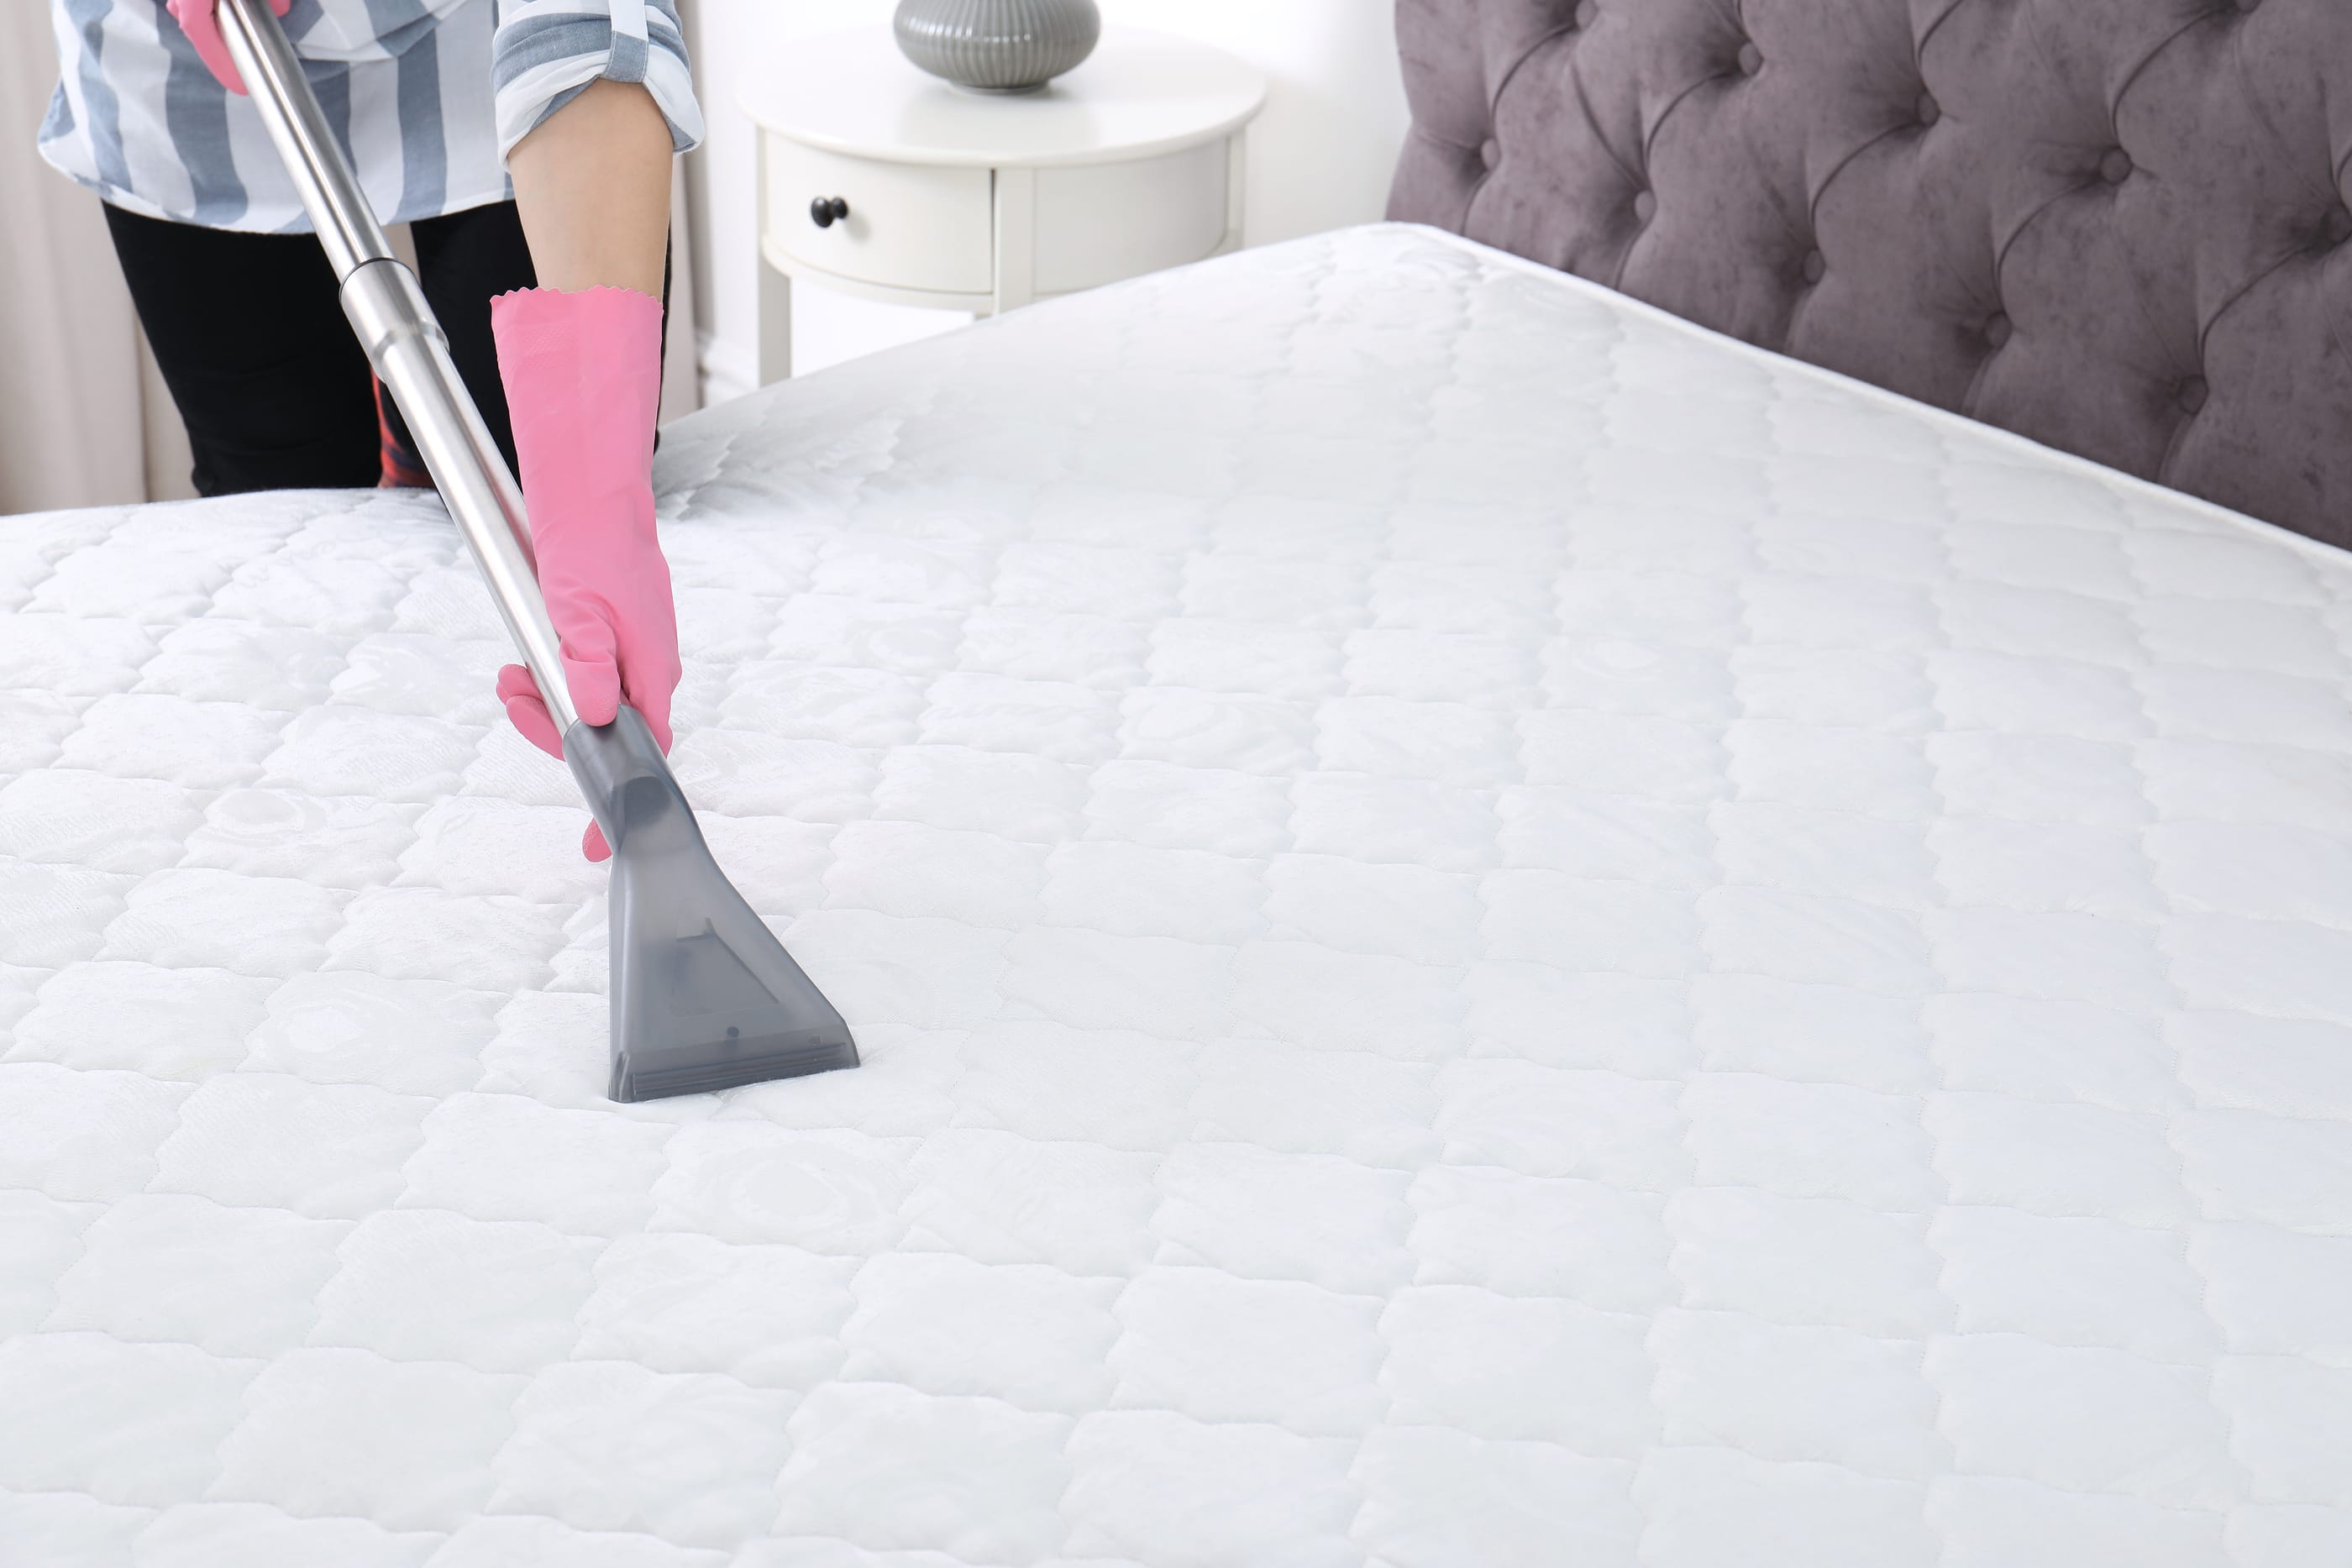 What Is The Best Thing To Clean A Mattress With?